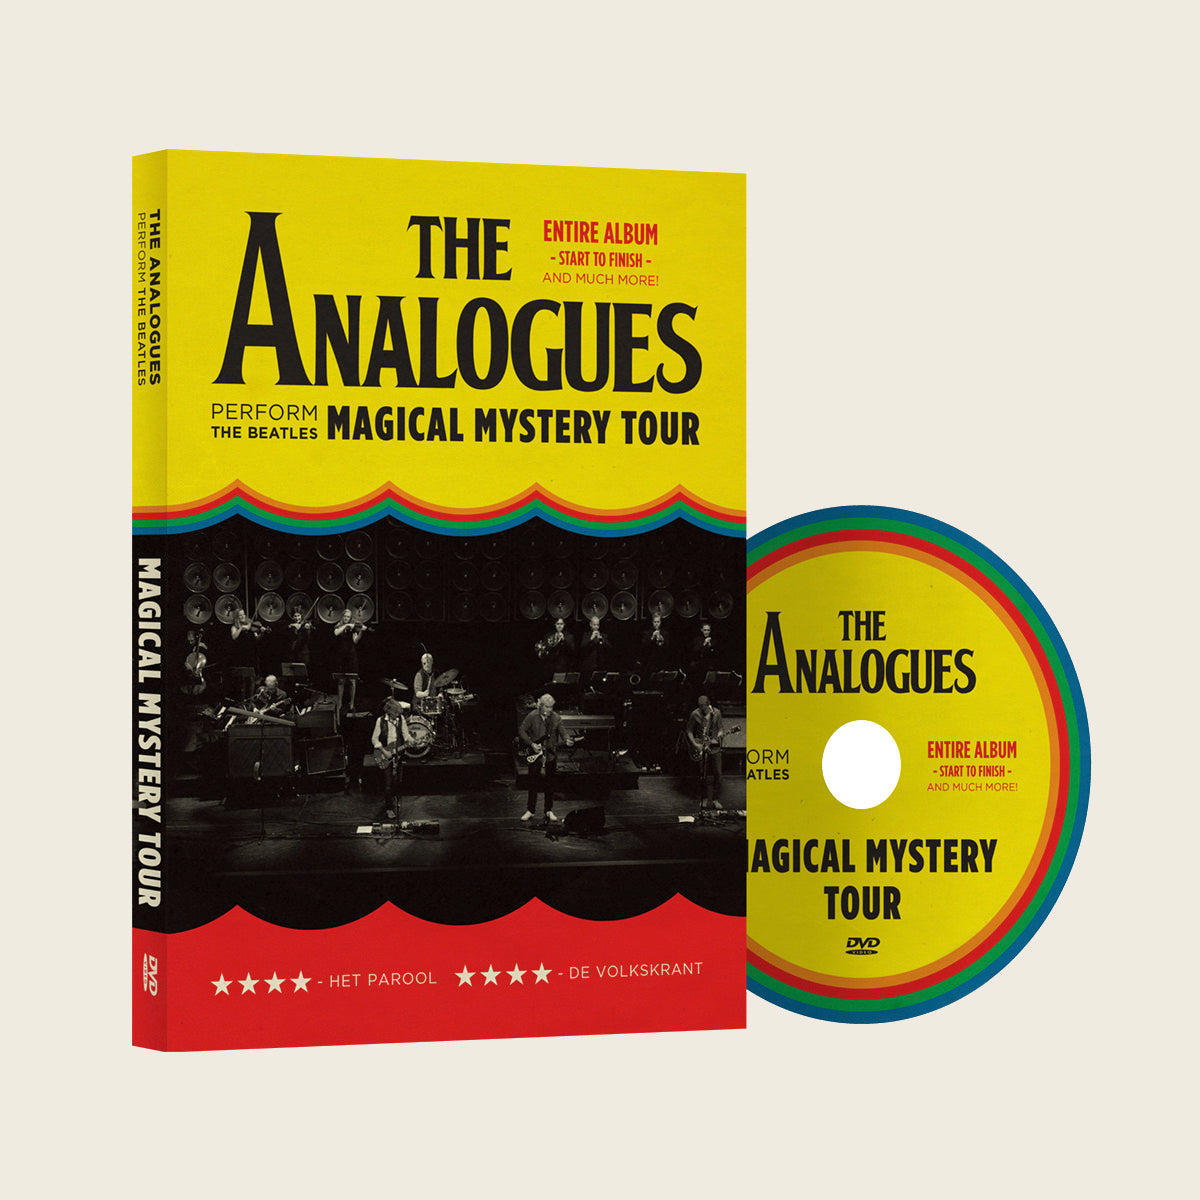 –　Shop　Mystery　DVD　Live　Concert　Magical　Analogues　The　The　Analogues　Tour